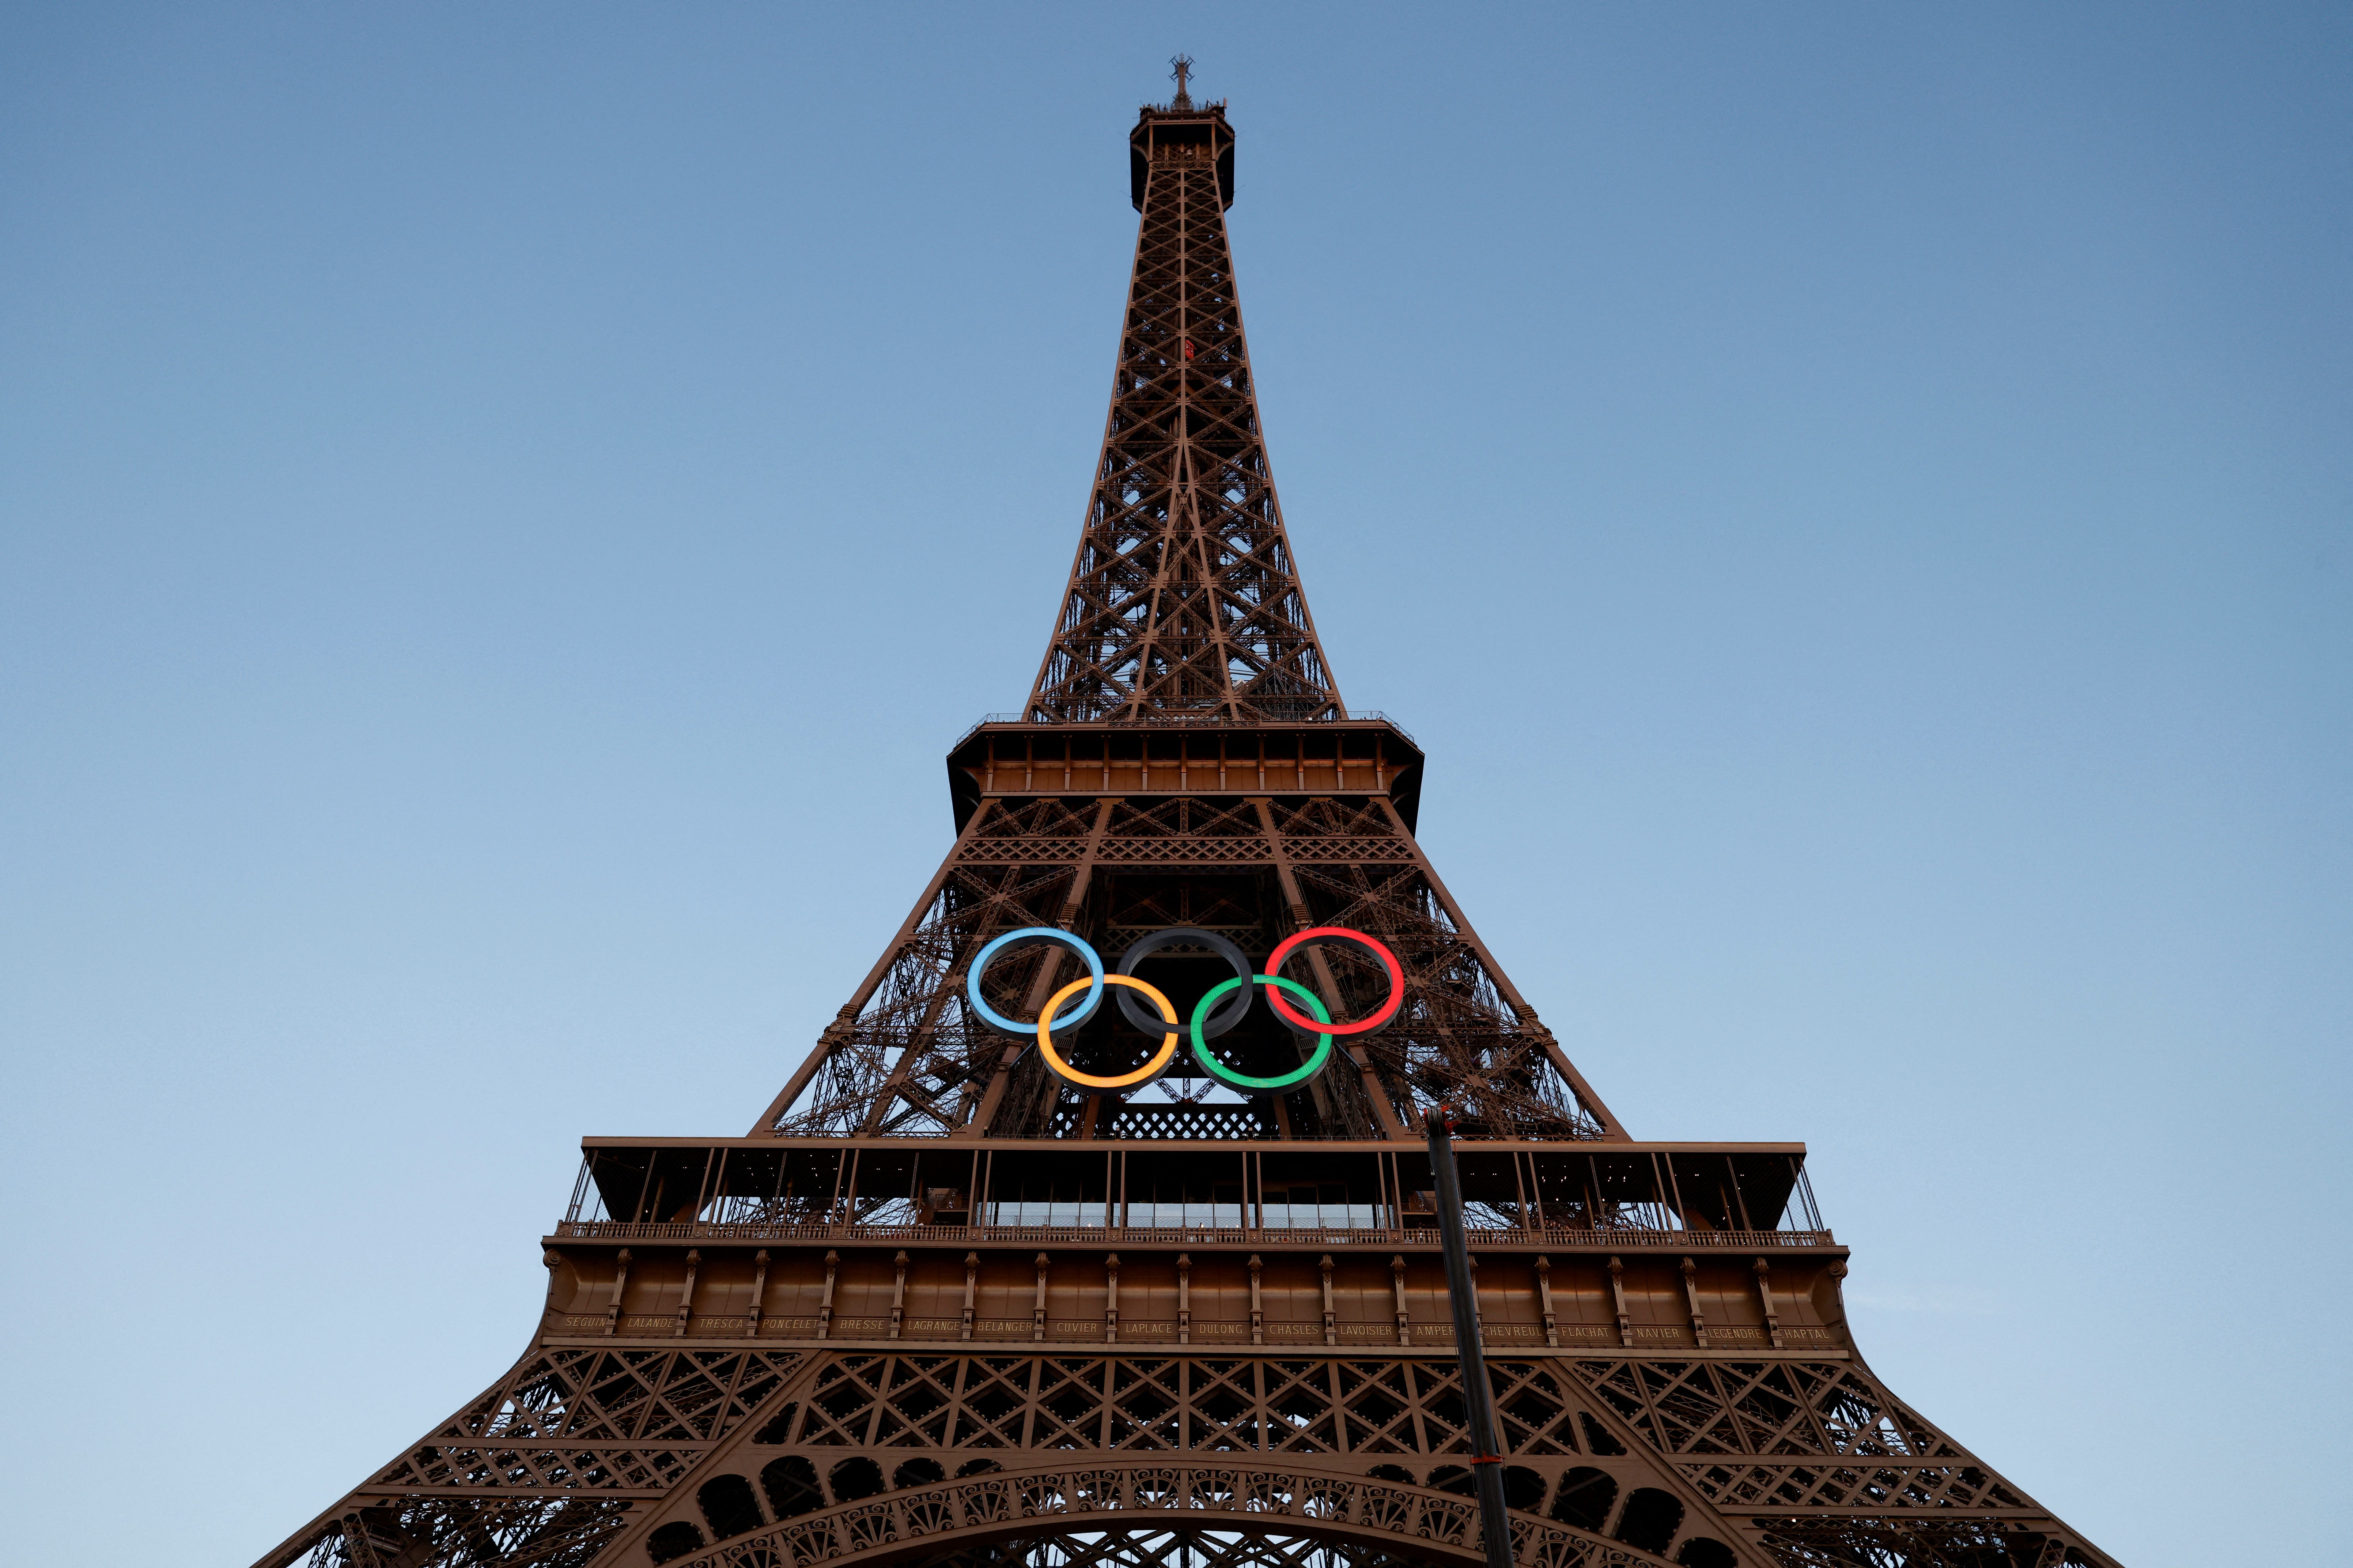 When are the Olympics? How to watch, stream the 2024 Summer Games in Paris